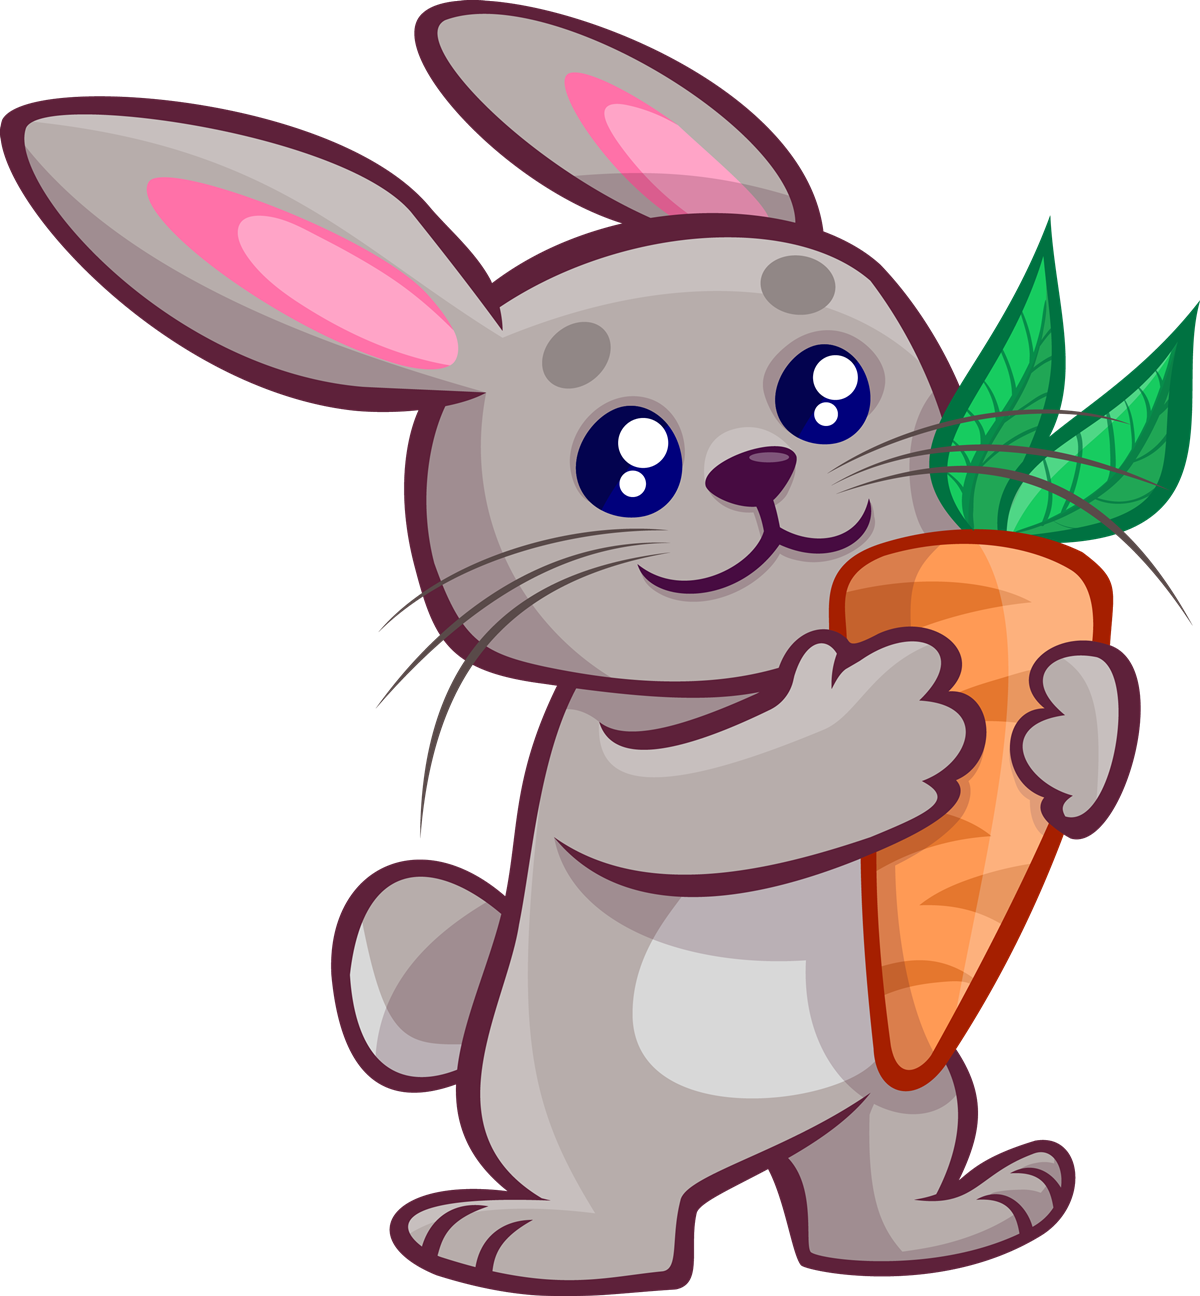 Bunny Cartoon Images | Free download on ClipArtMag